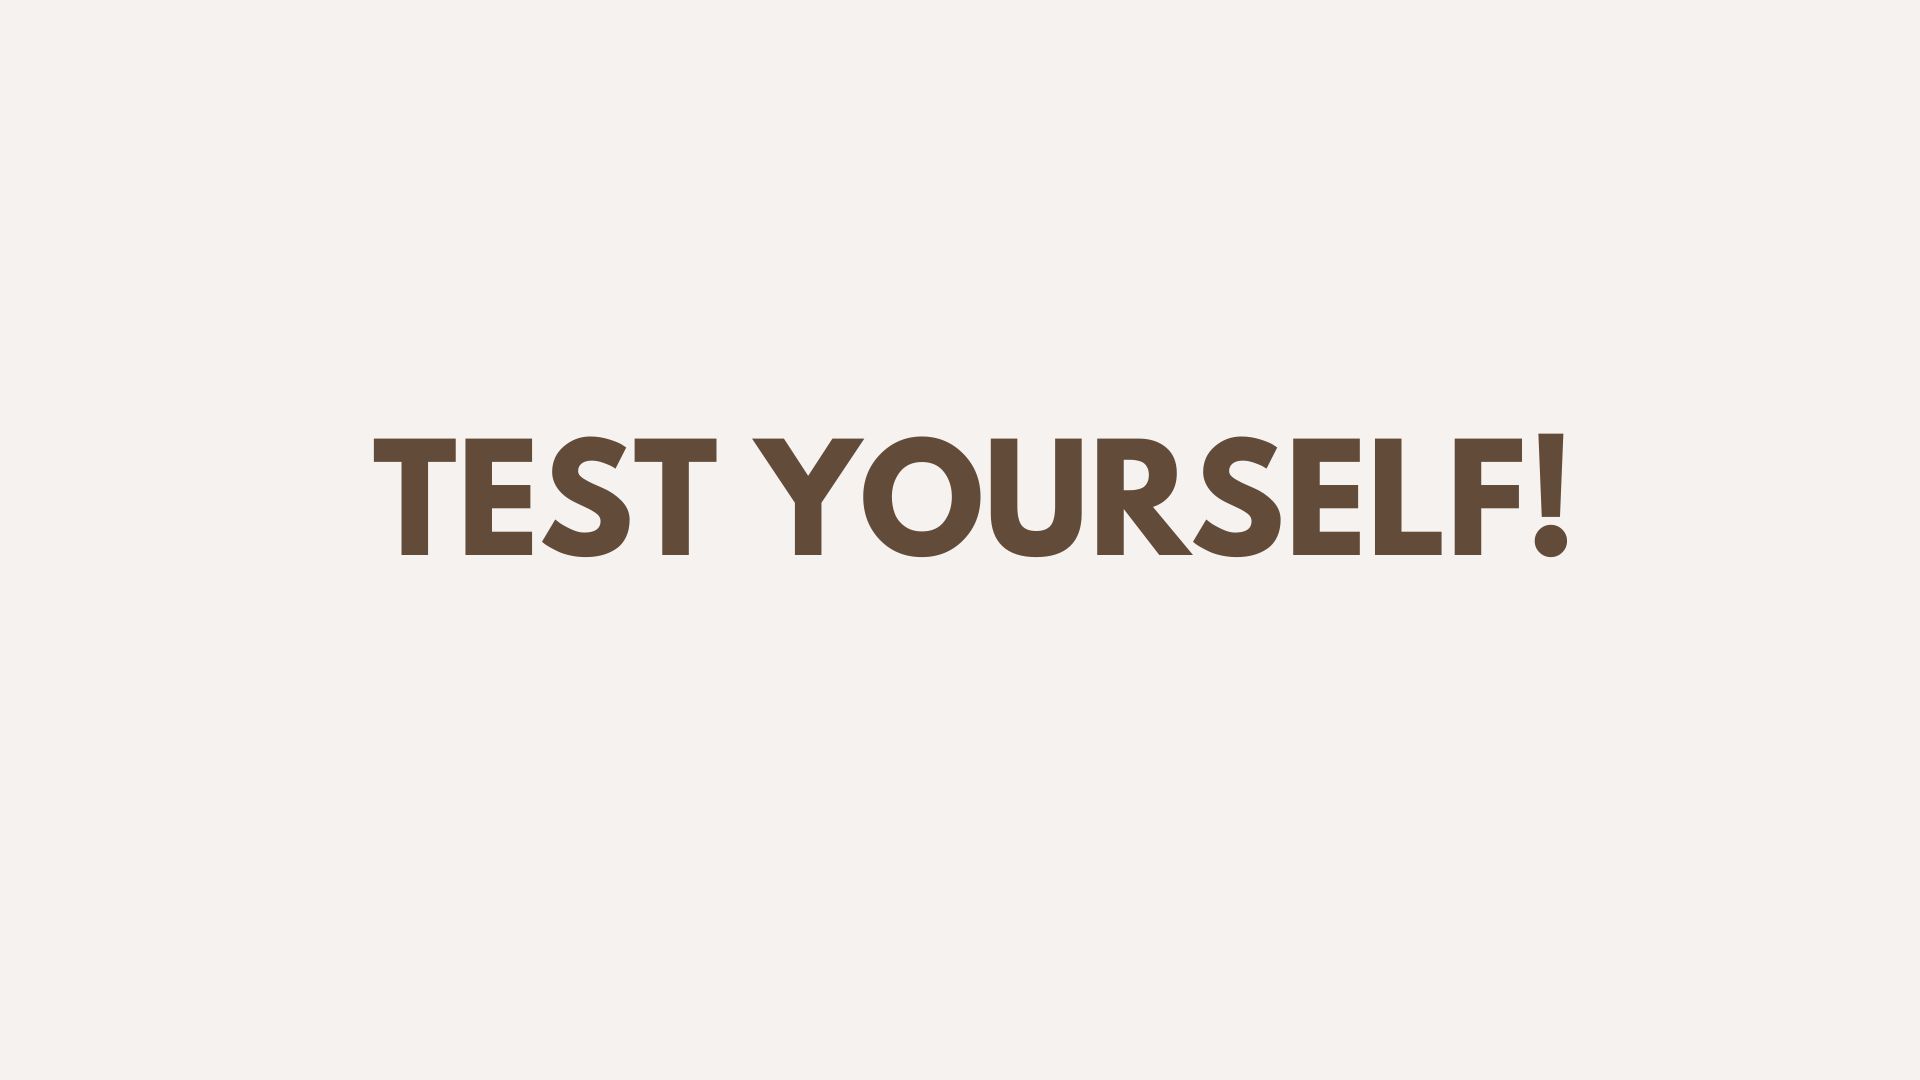 TEST YOURSELF! Course - 5